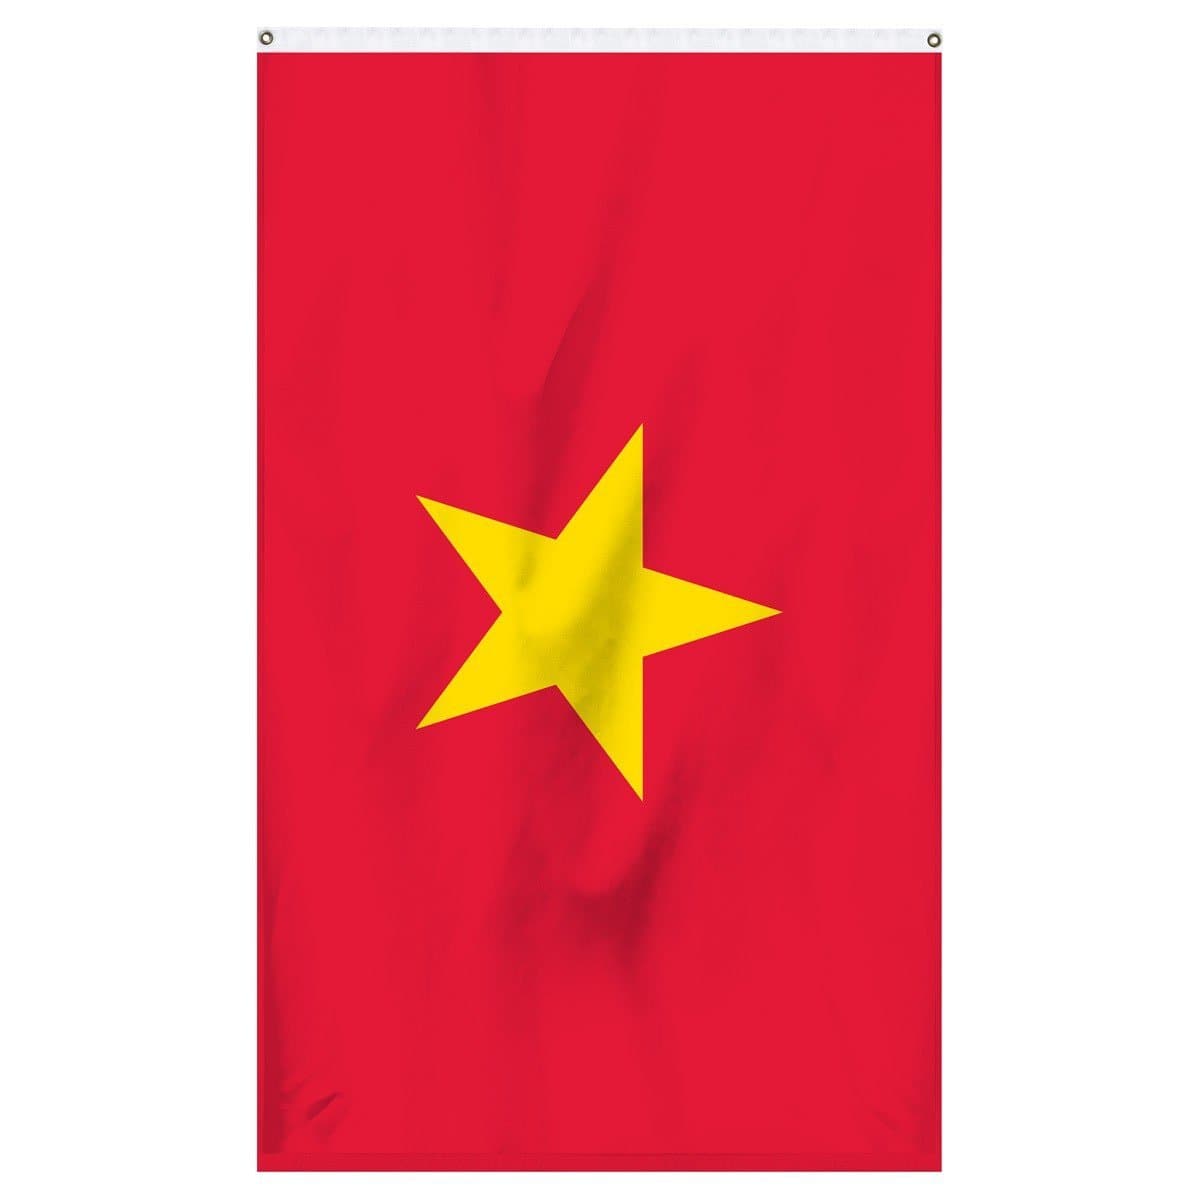 Vietnam National flag for sale to buy online from the American company Atlantic Flag and Pole. Red flag with one large yellow star.